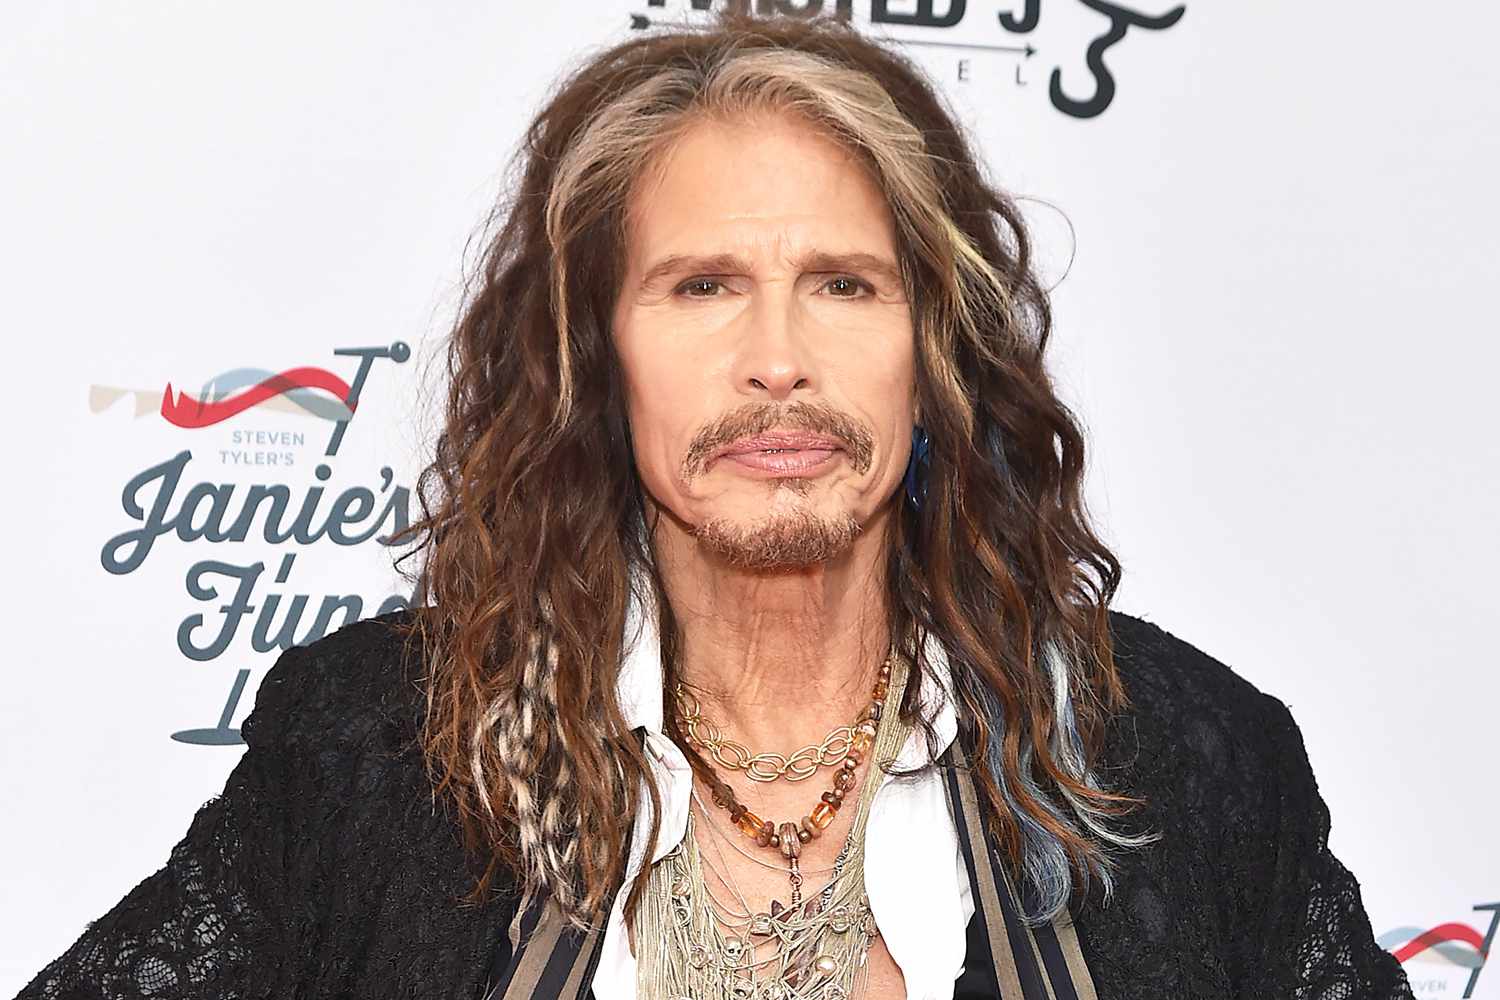 Steven Tyler Sued for Allegedly Sexually Assaulting 17-Year-Old in 1975